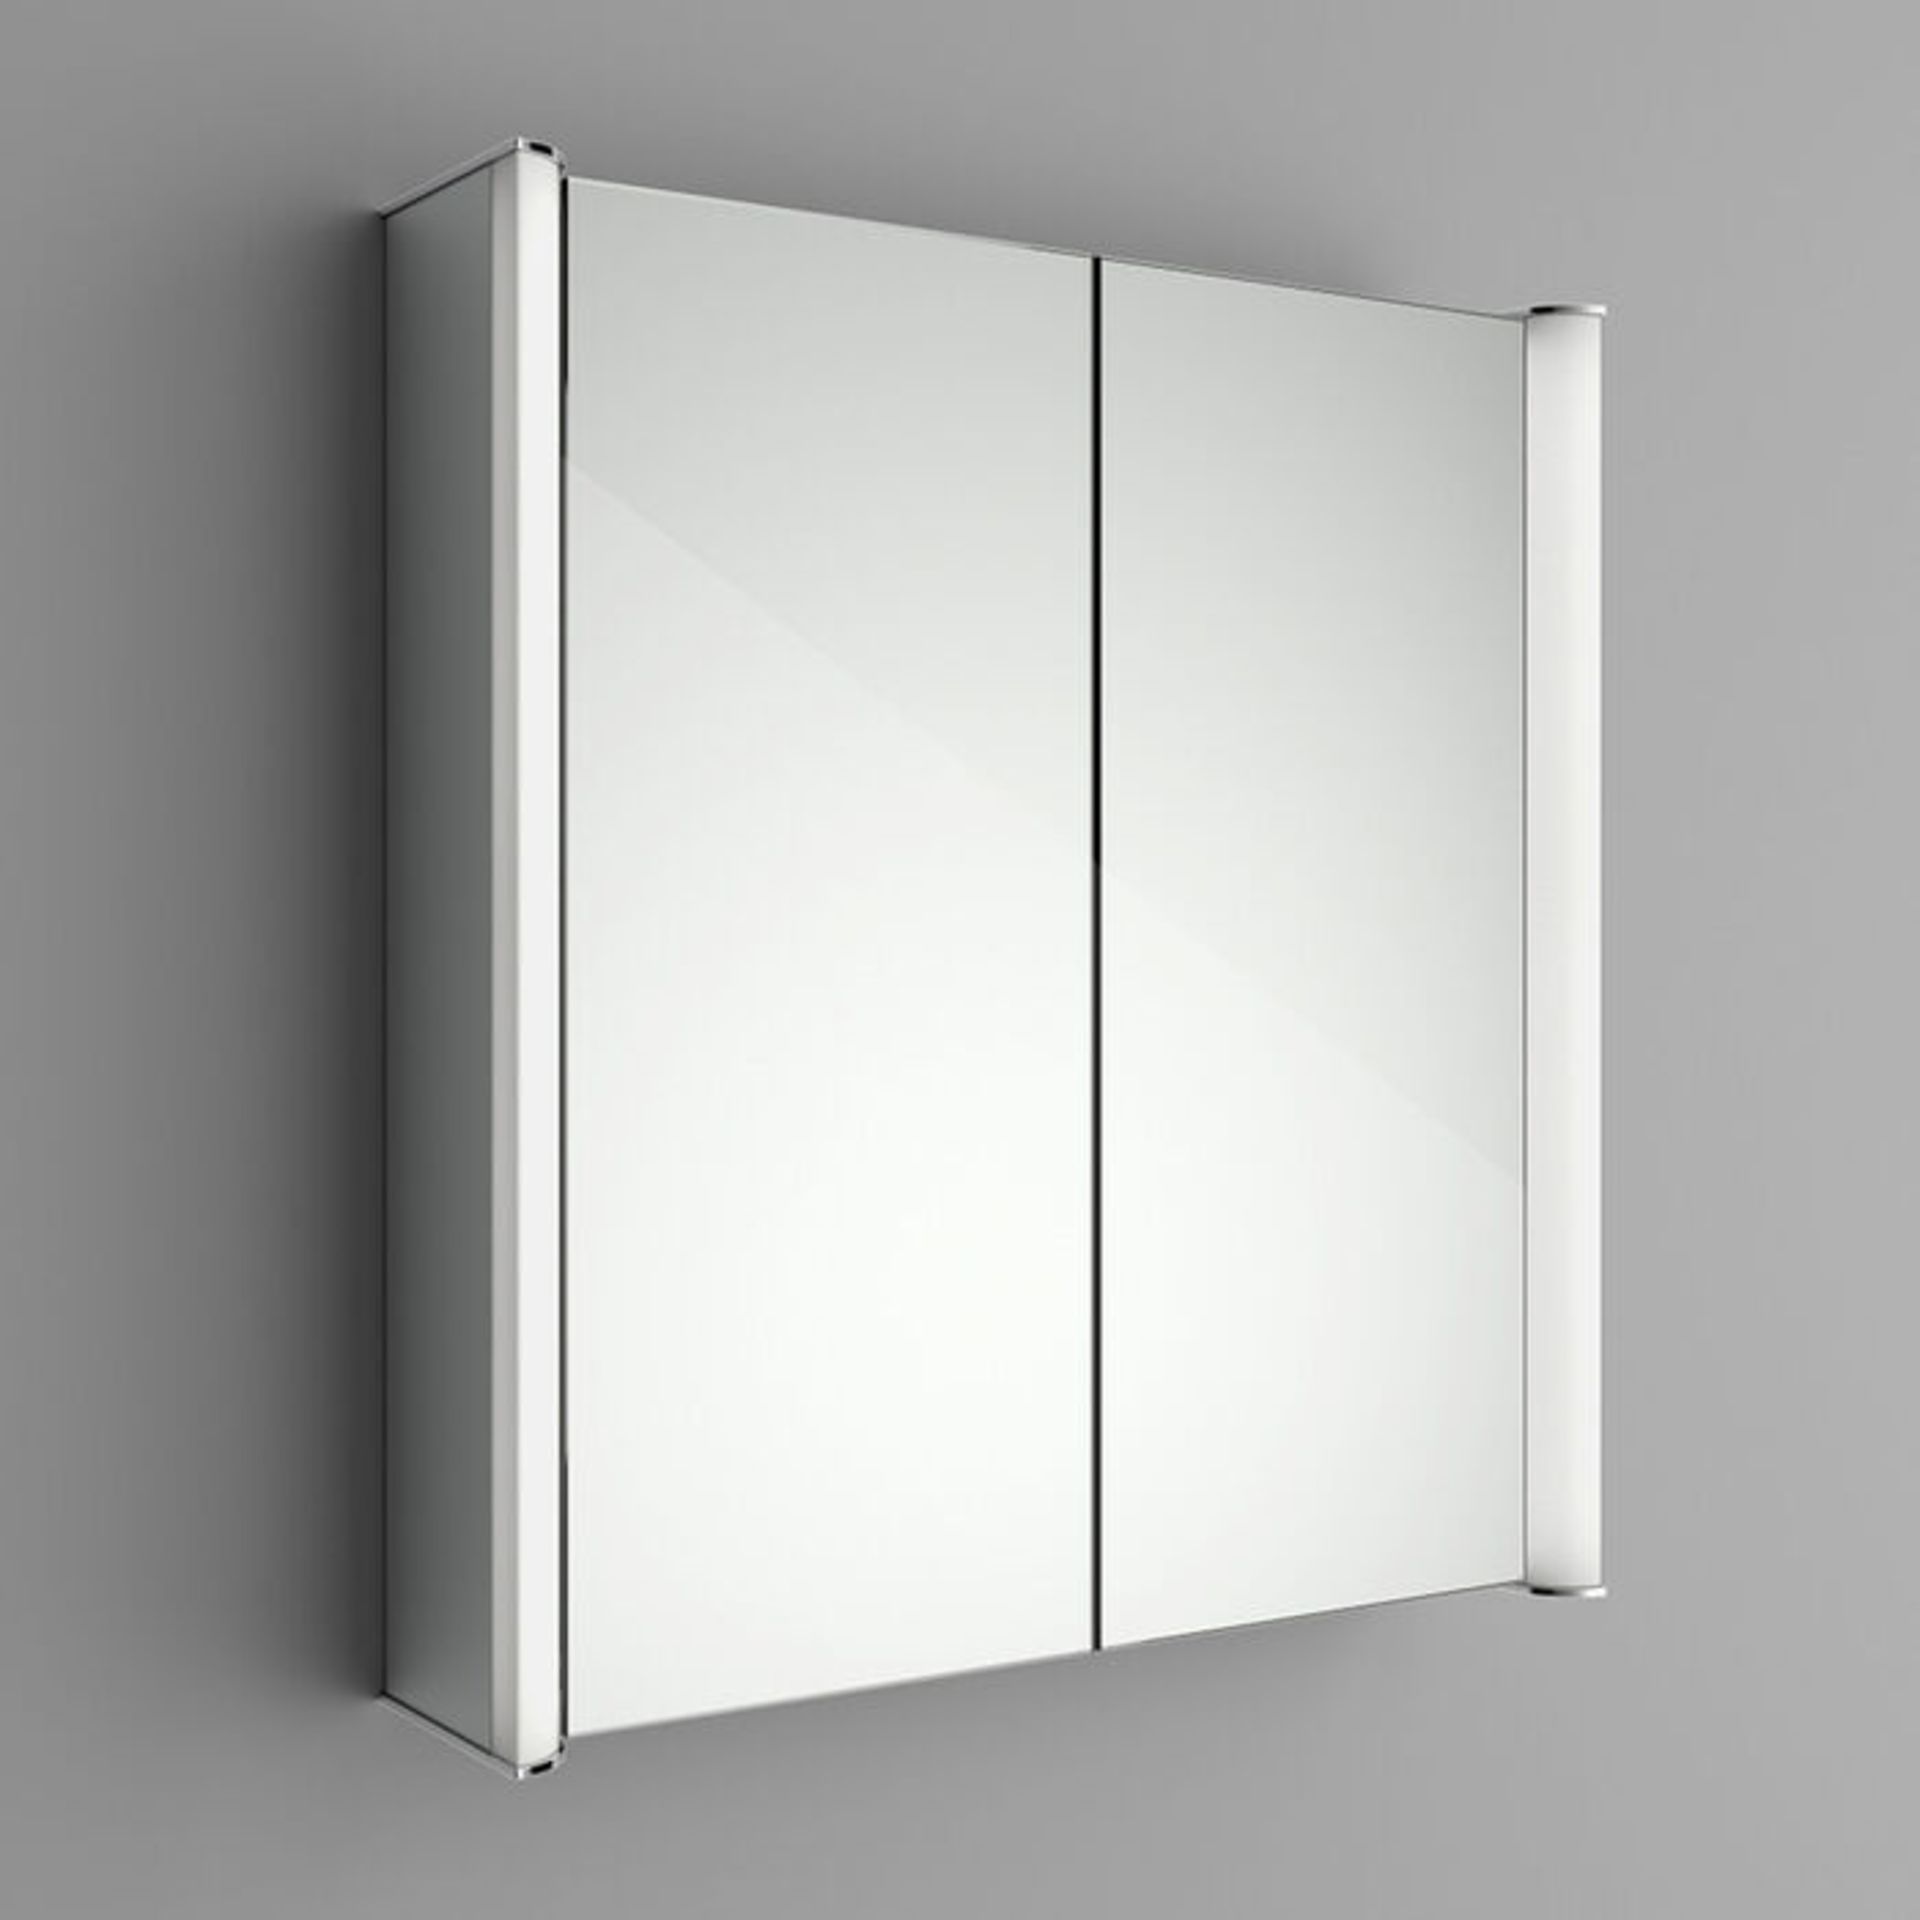 (Z10) 600x650mm Bloom Illuminated LED Mirror Cabinet - Shaver Socket. RRP £499.99. Double Side... - Image 3 of 3